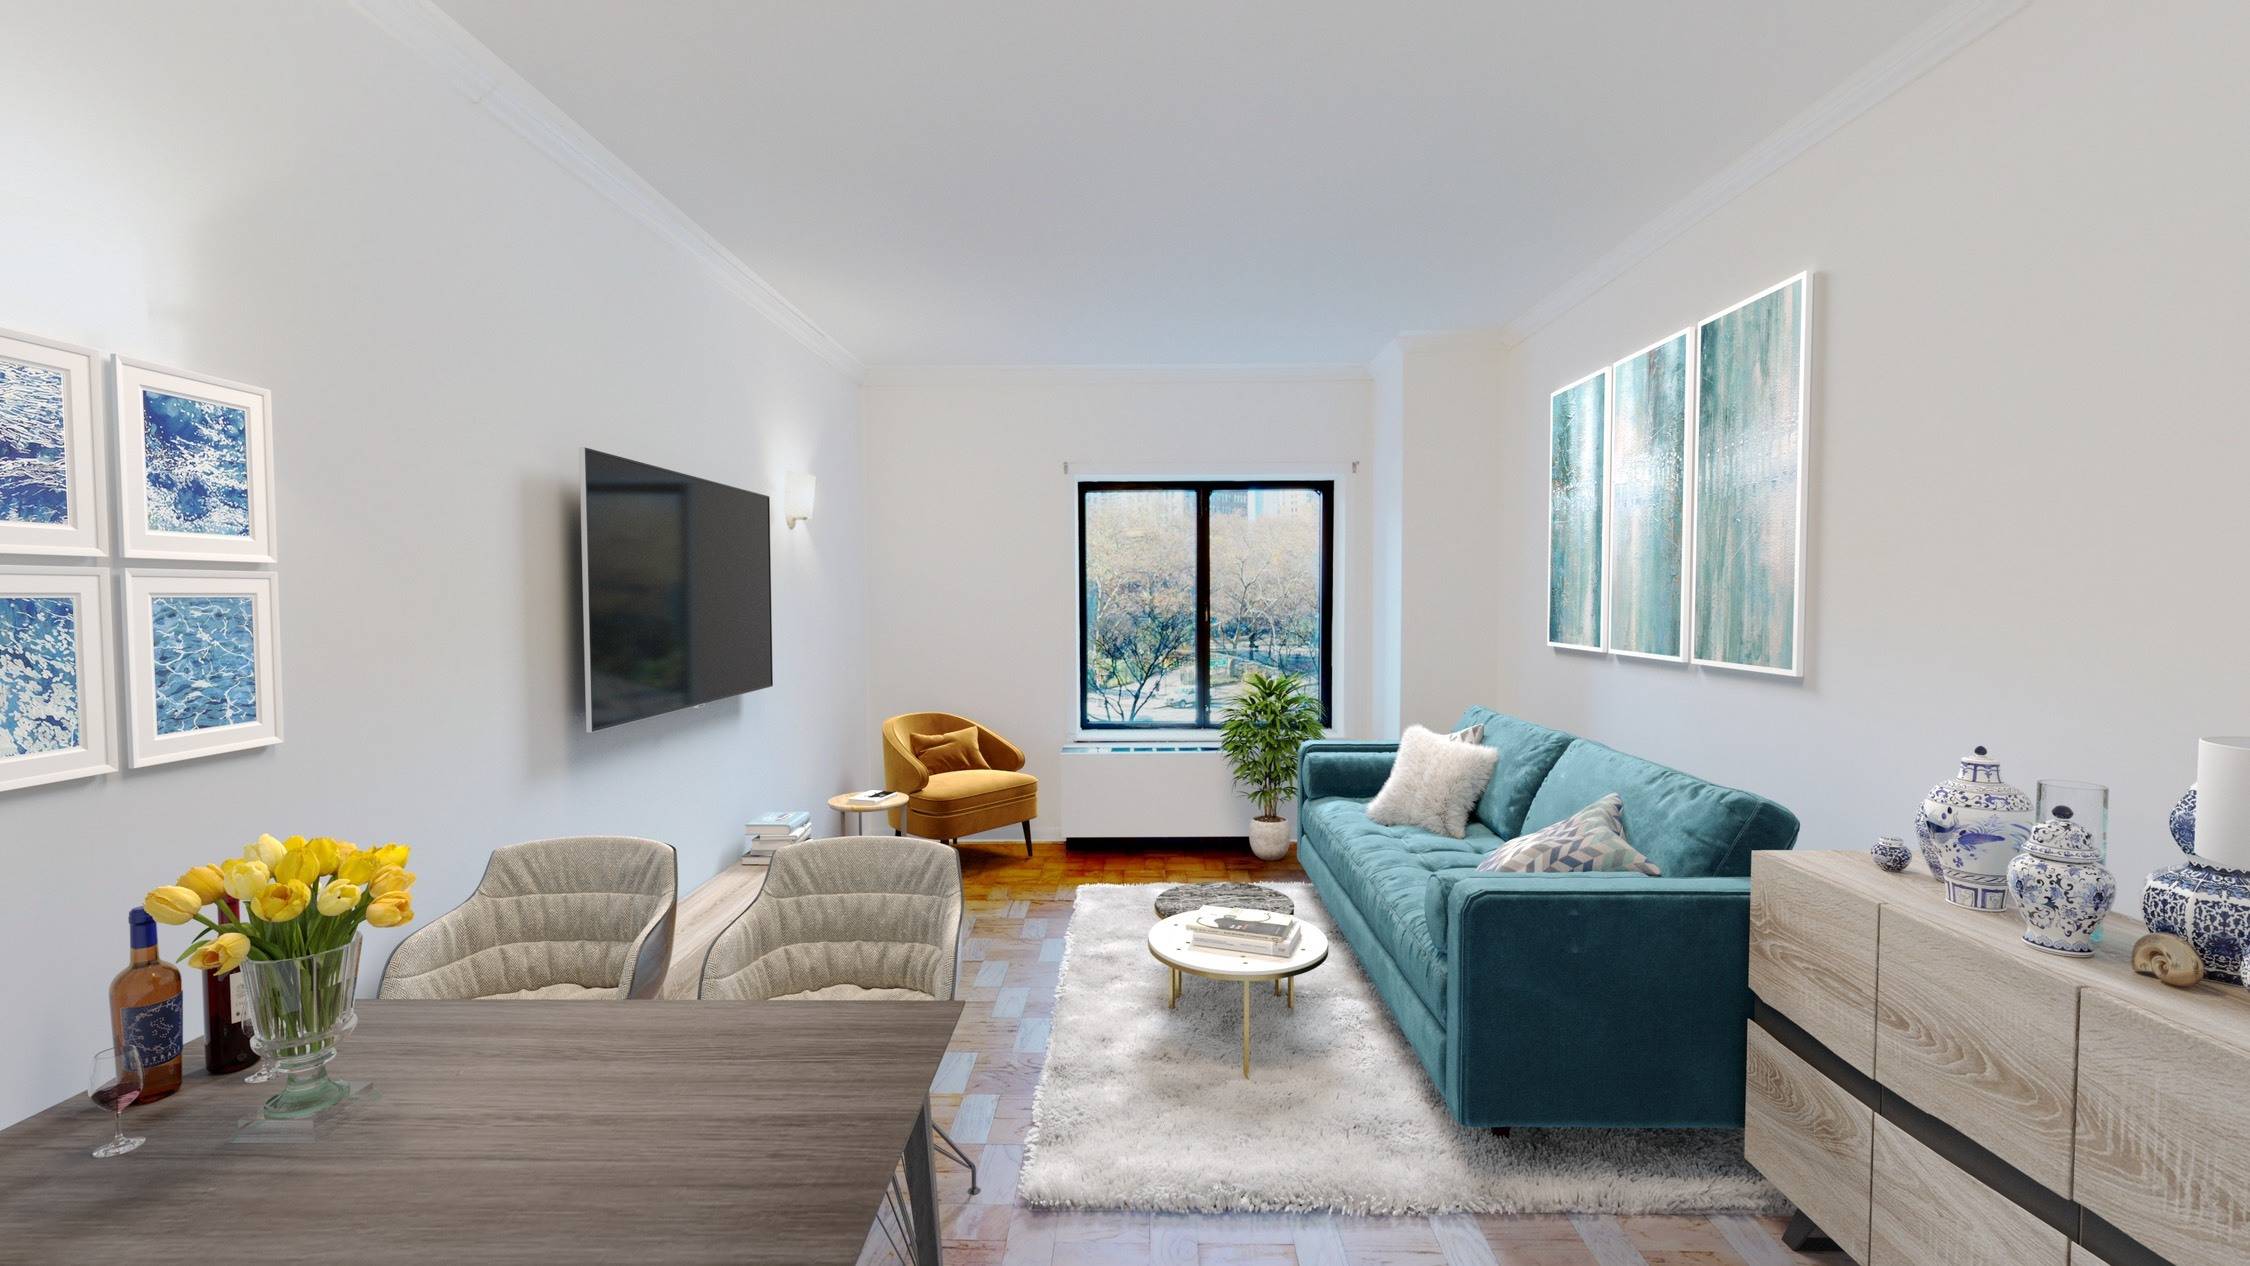 NEW TO MARKET Amazing opportunity to own a beautiful and sunny split 2 bed 2 bath apartment in luxurious NYC midtown condominium building that is full of amenities !